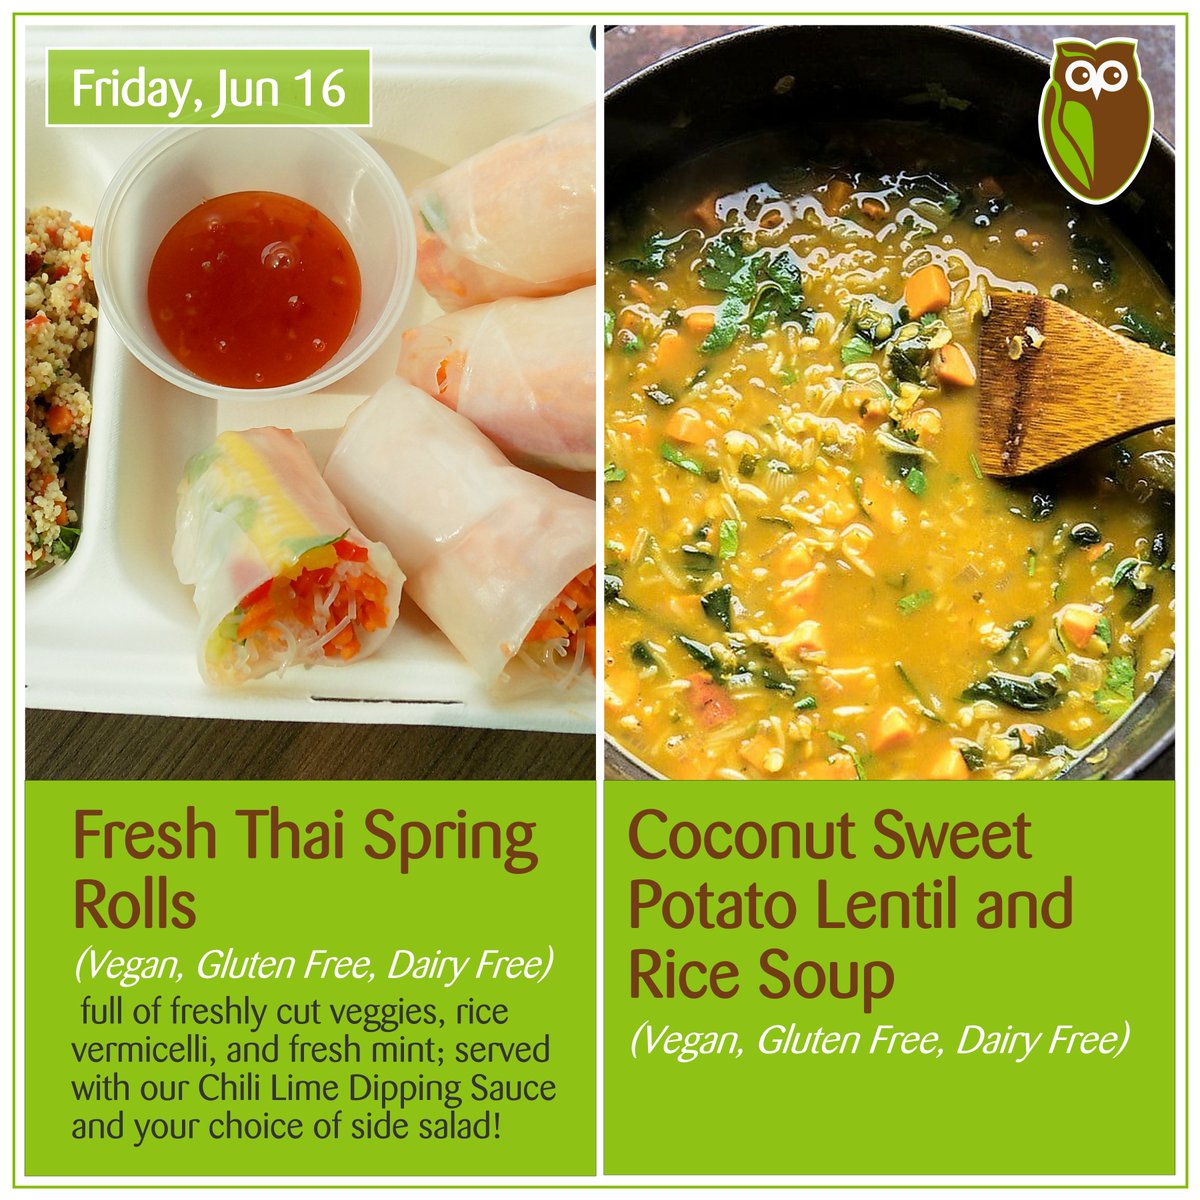 Our Daily Soup and Feature for Friday. #realfood #glutenfree #dairyfree #kwvegan #kwvegetarian #kwawesome #wrawesome